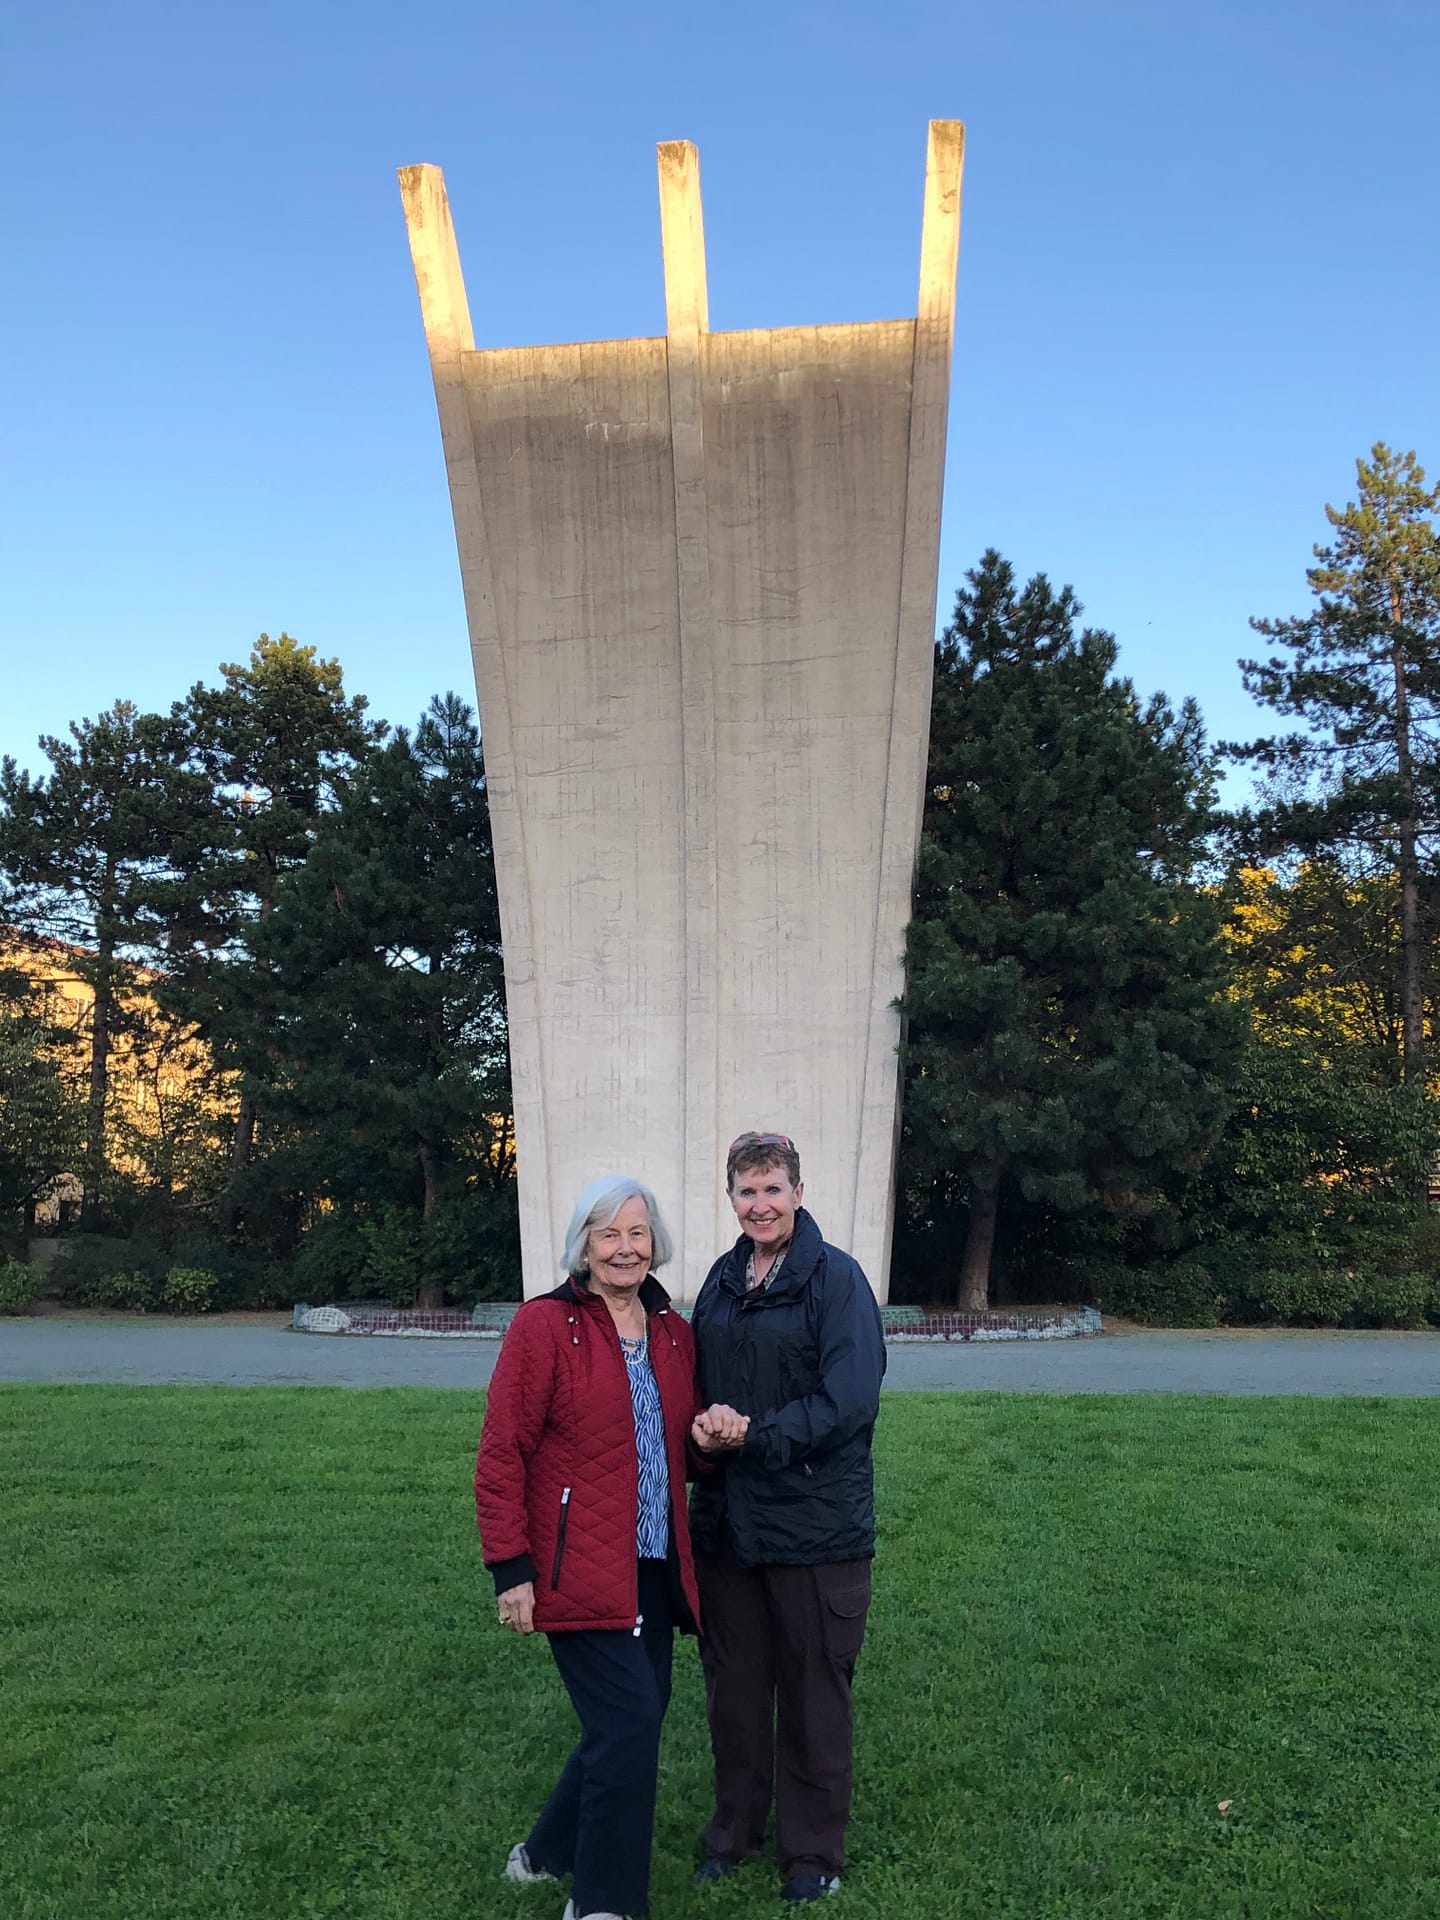 The Russians allowed the Americans and their Allies three flight corridors over Berlin. Gerda and her niece Vanessa are in front of a monument to honor of those life-saving routes through which the candy bombers flew.